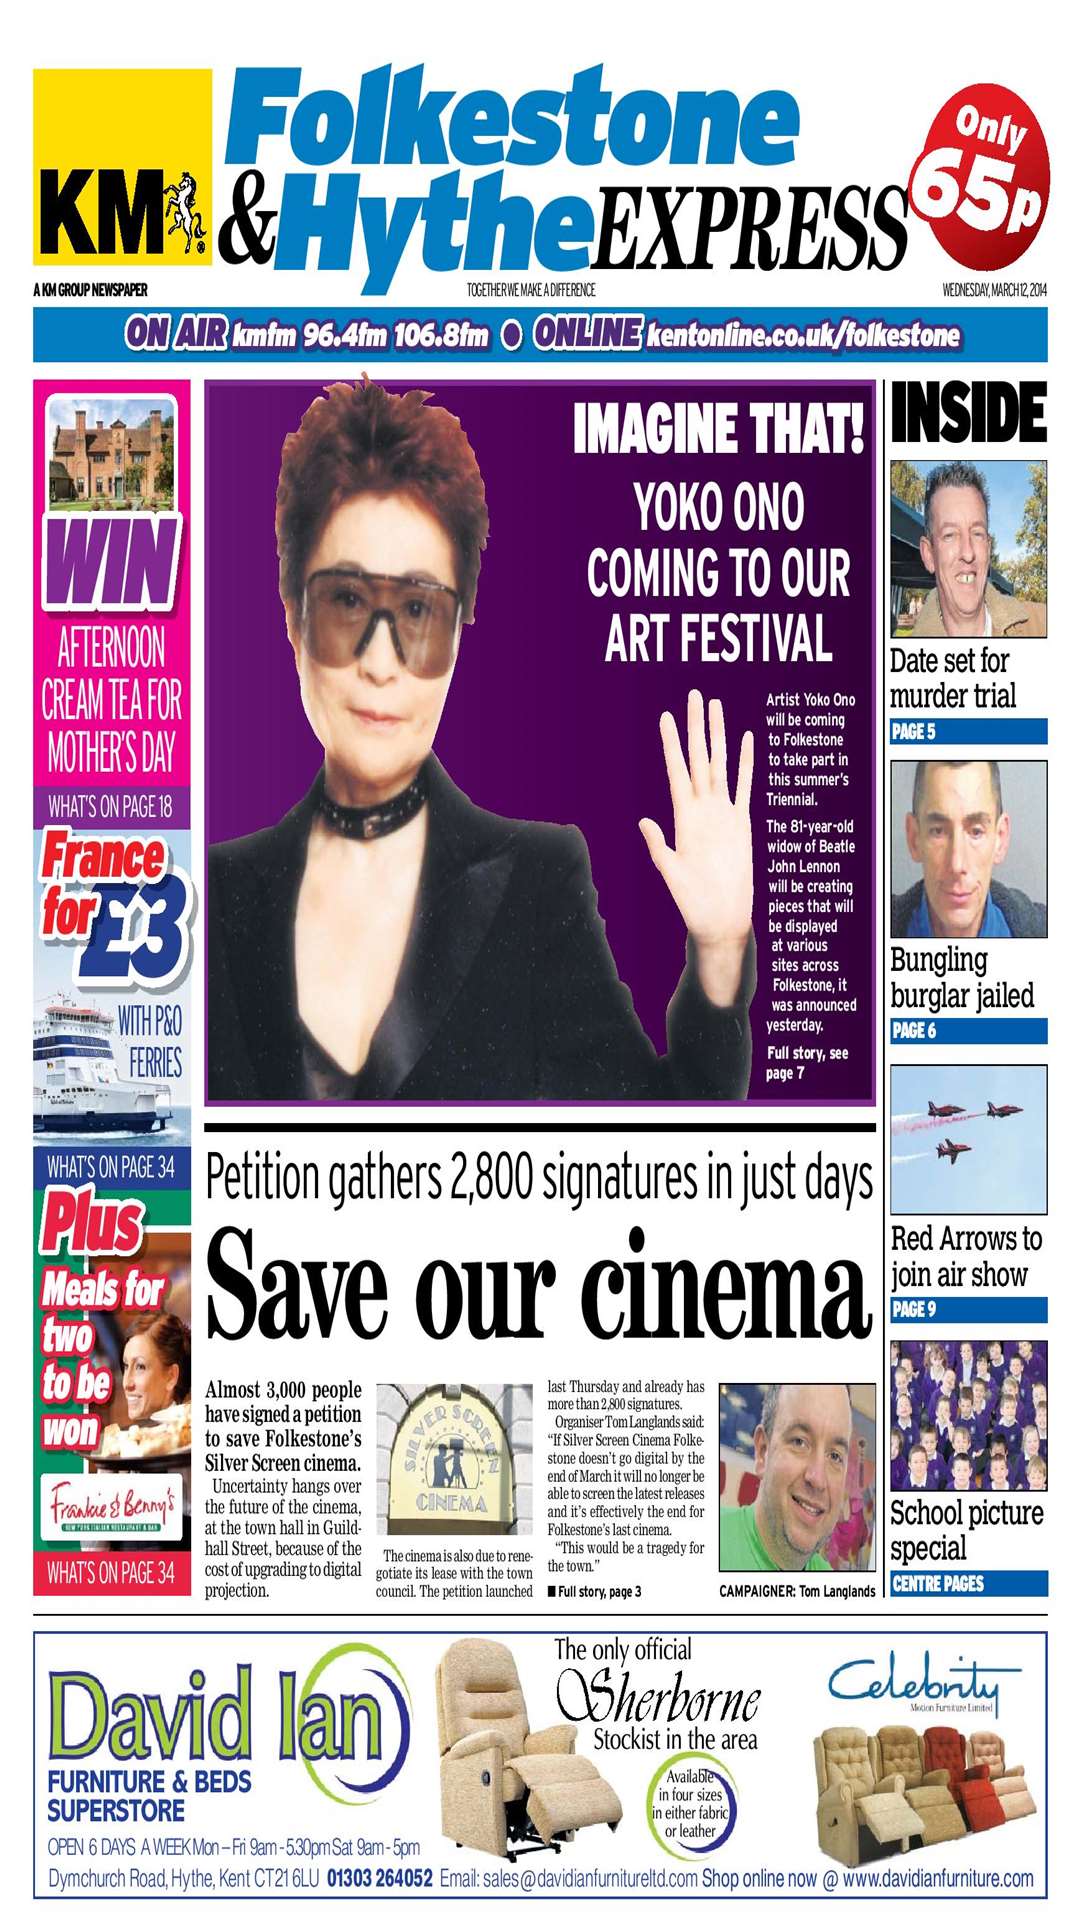 Your Folkestone & Hythe Express is out now